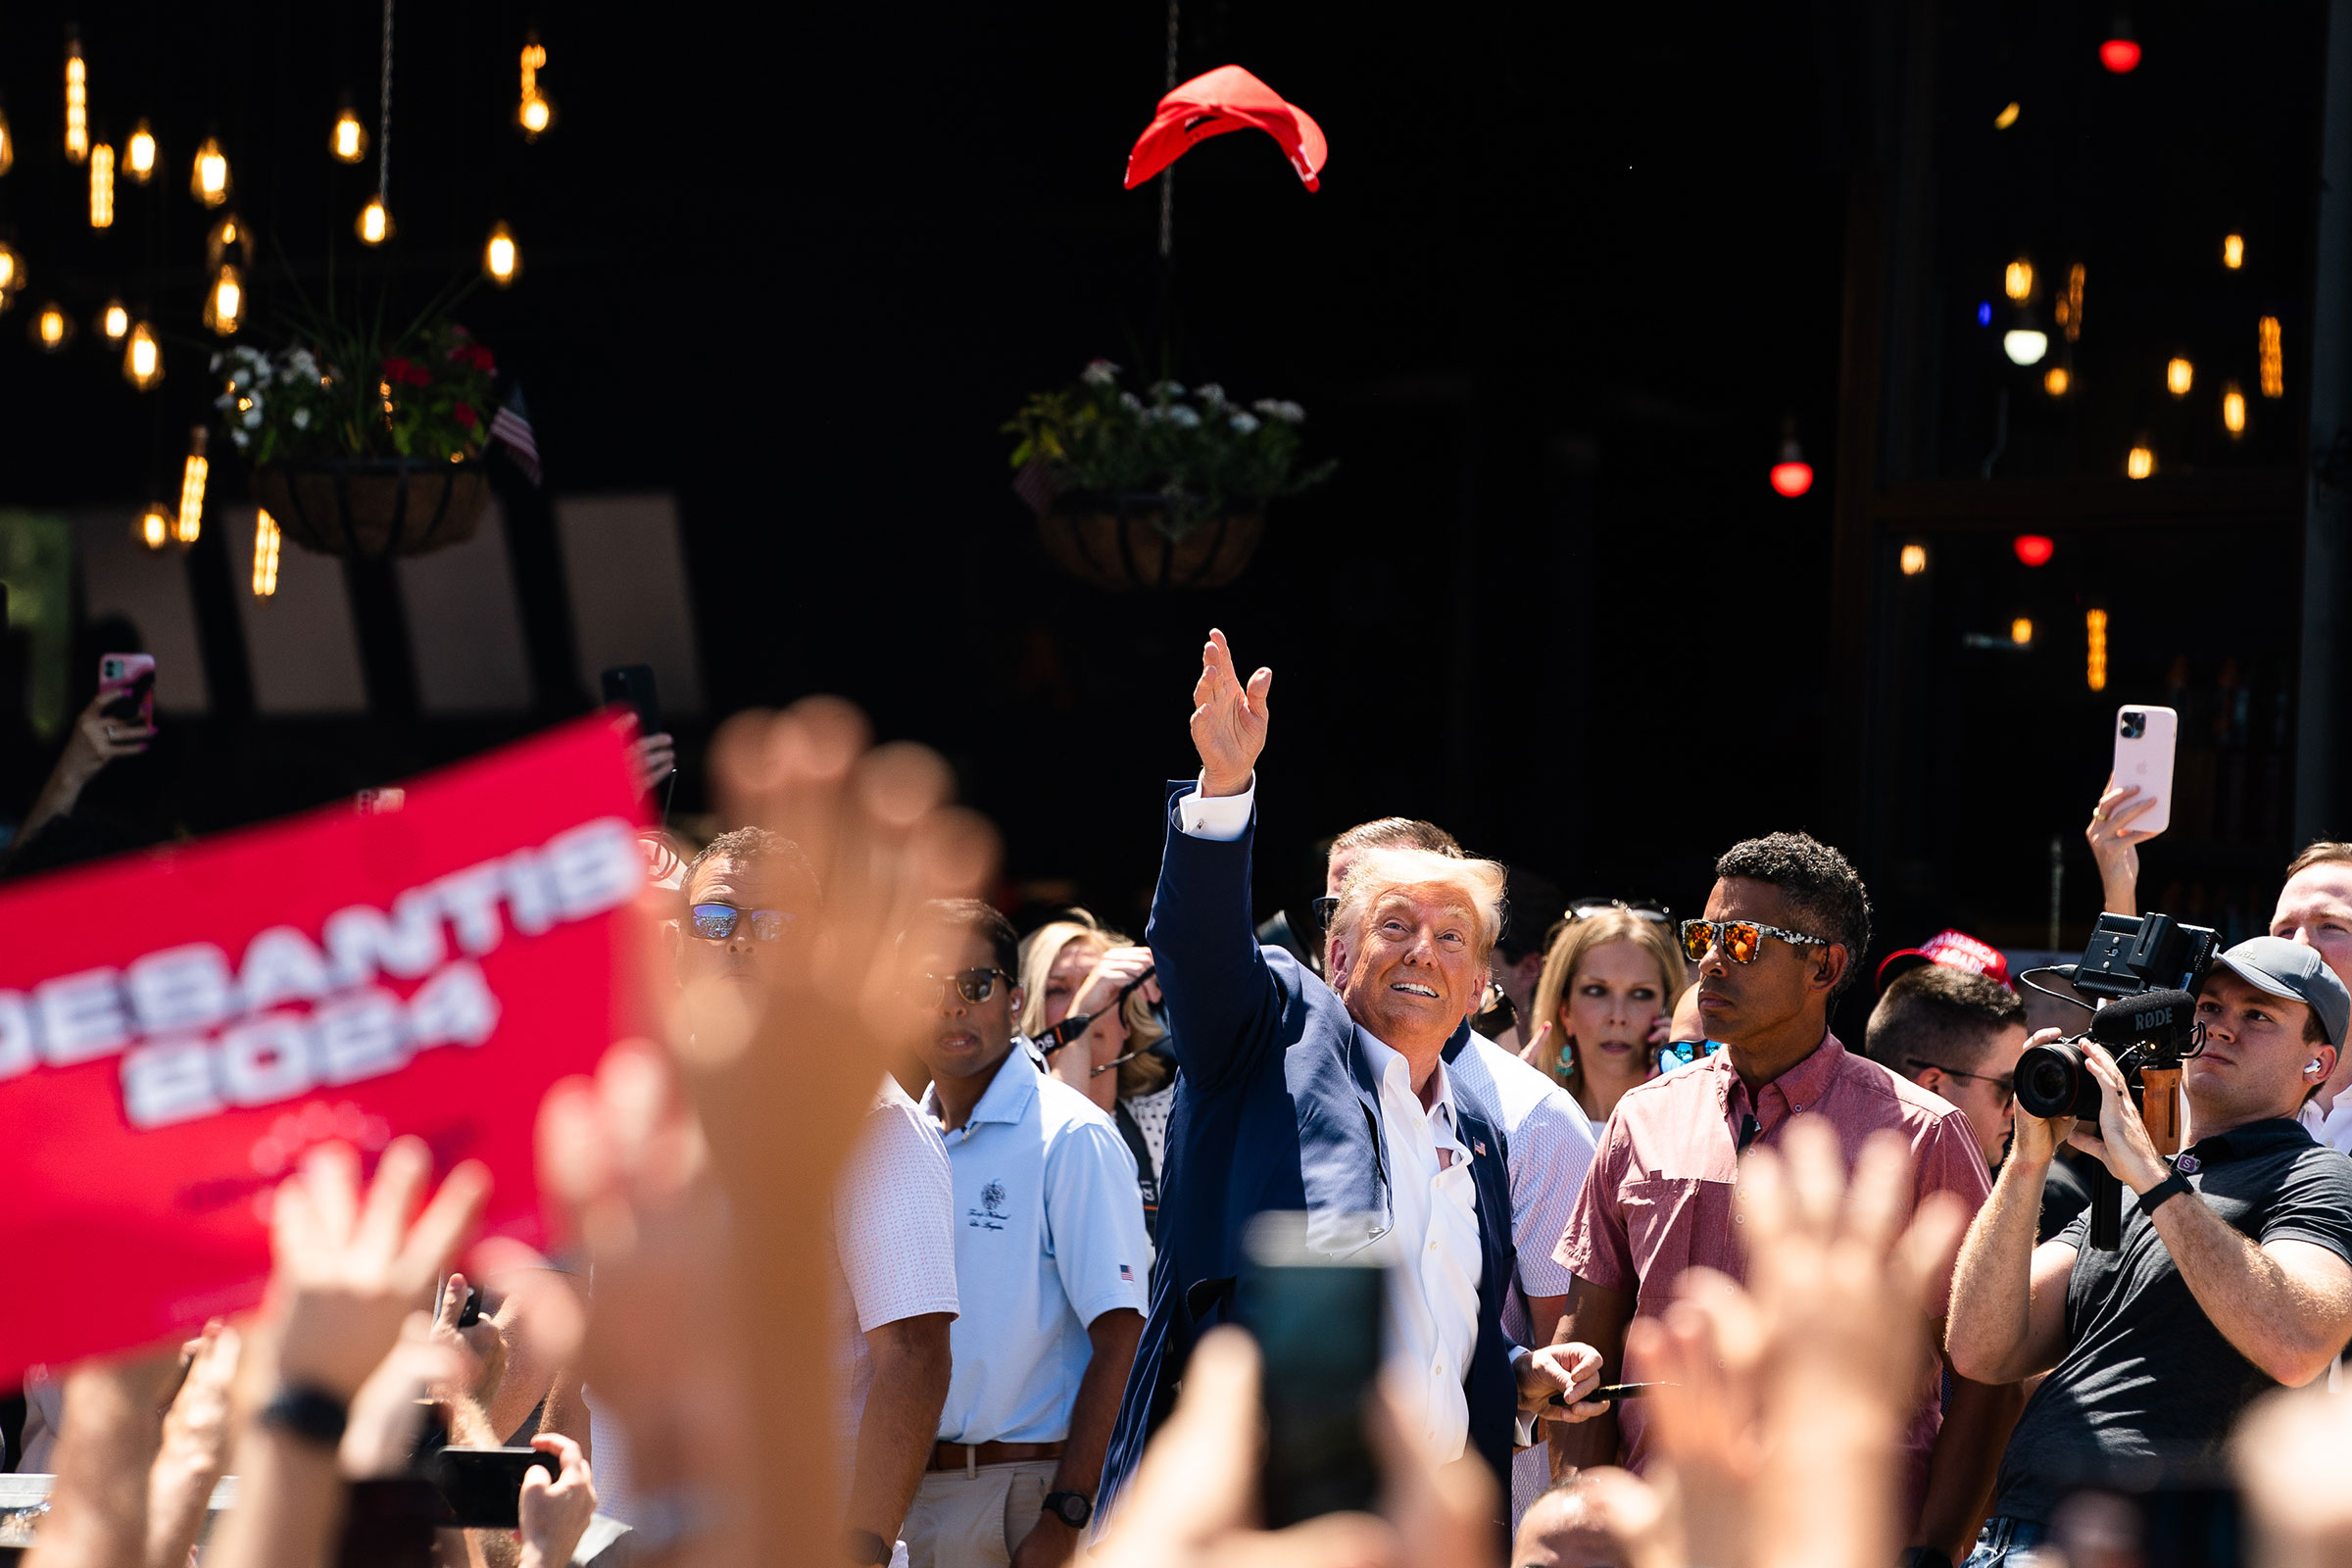 The former President at the Iowa State Fair in Des Moines on Aug. 12 (Demetrius Freeman—The Washington Post/Getty Images)